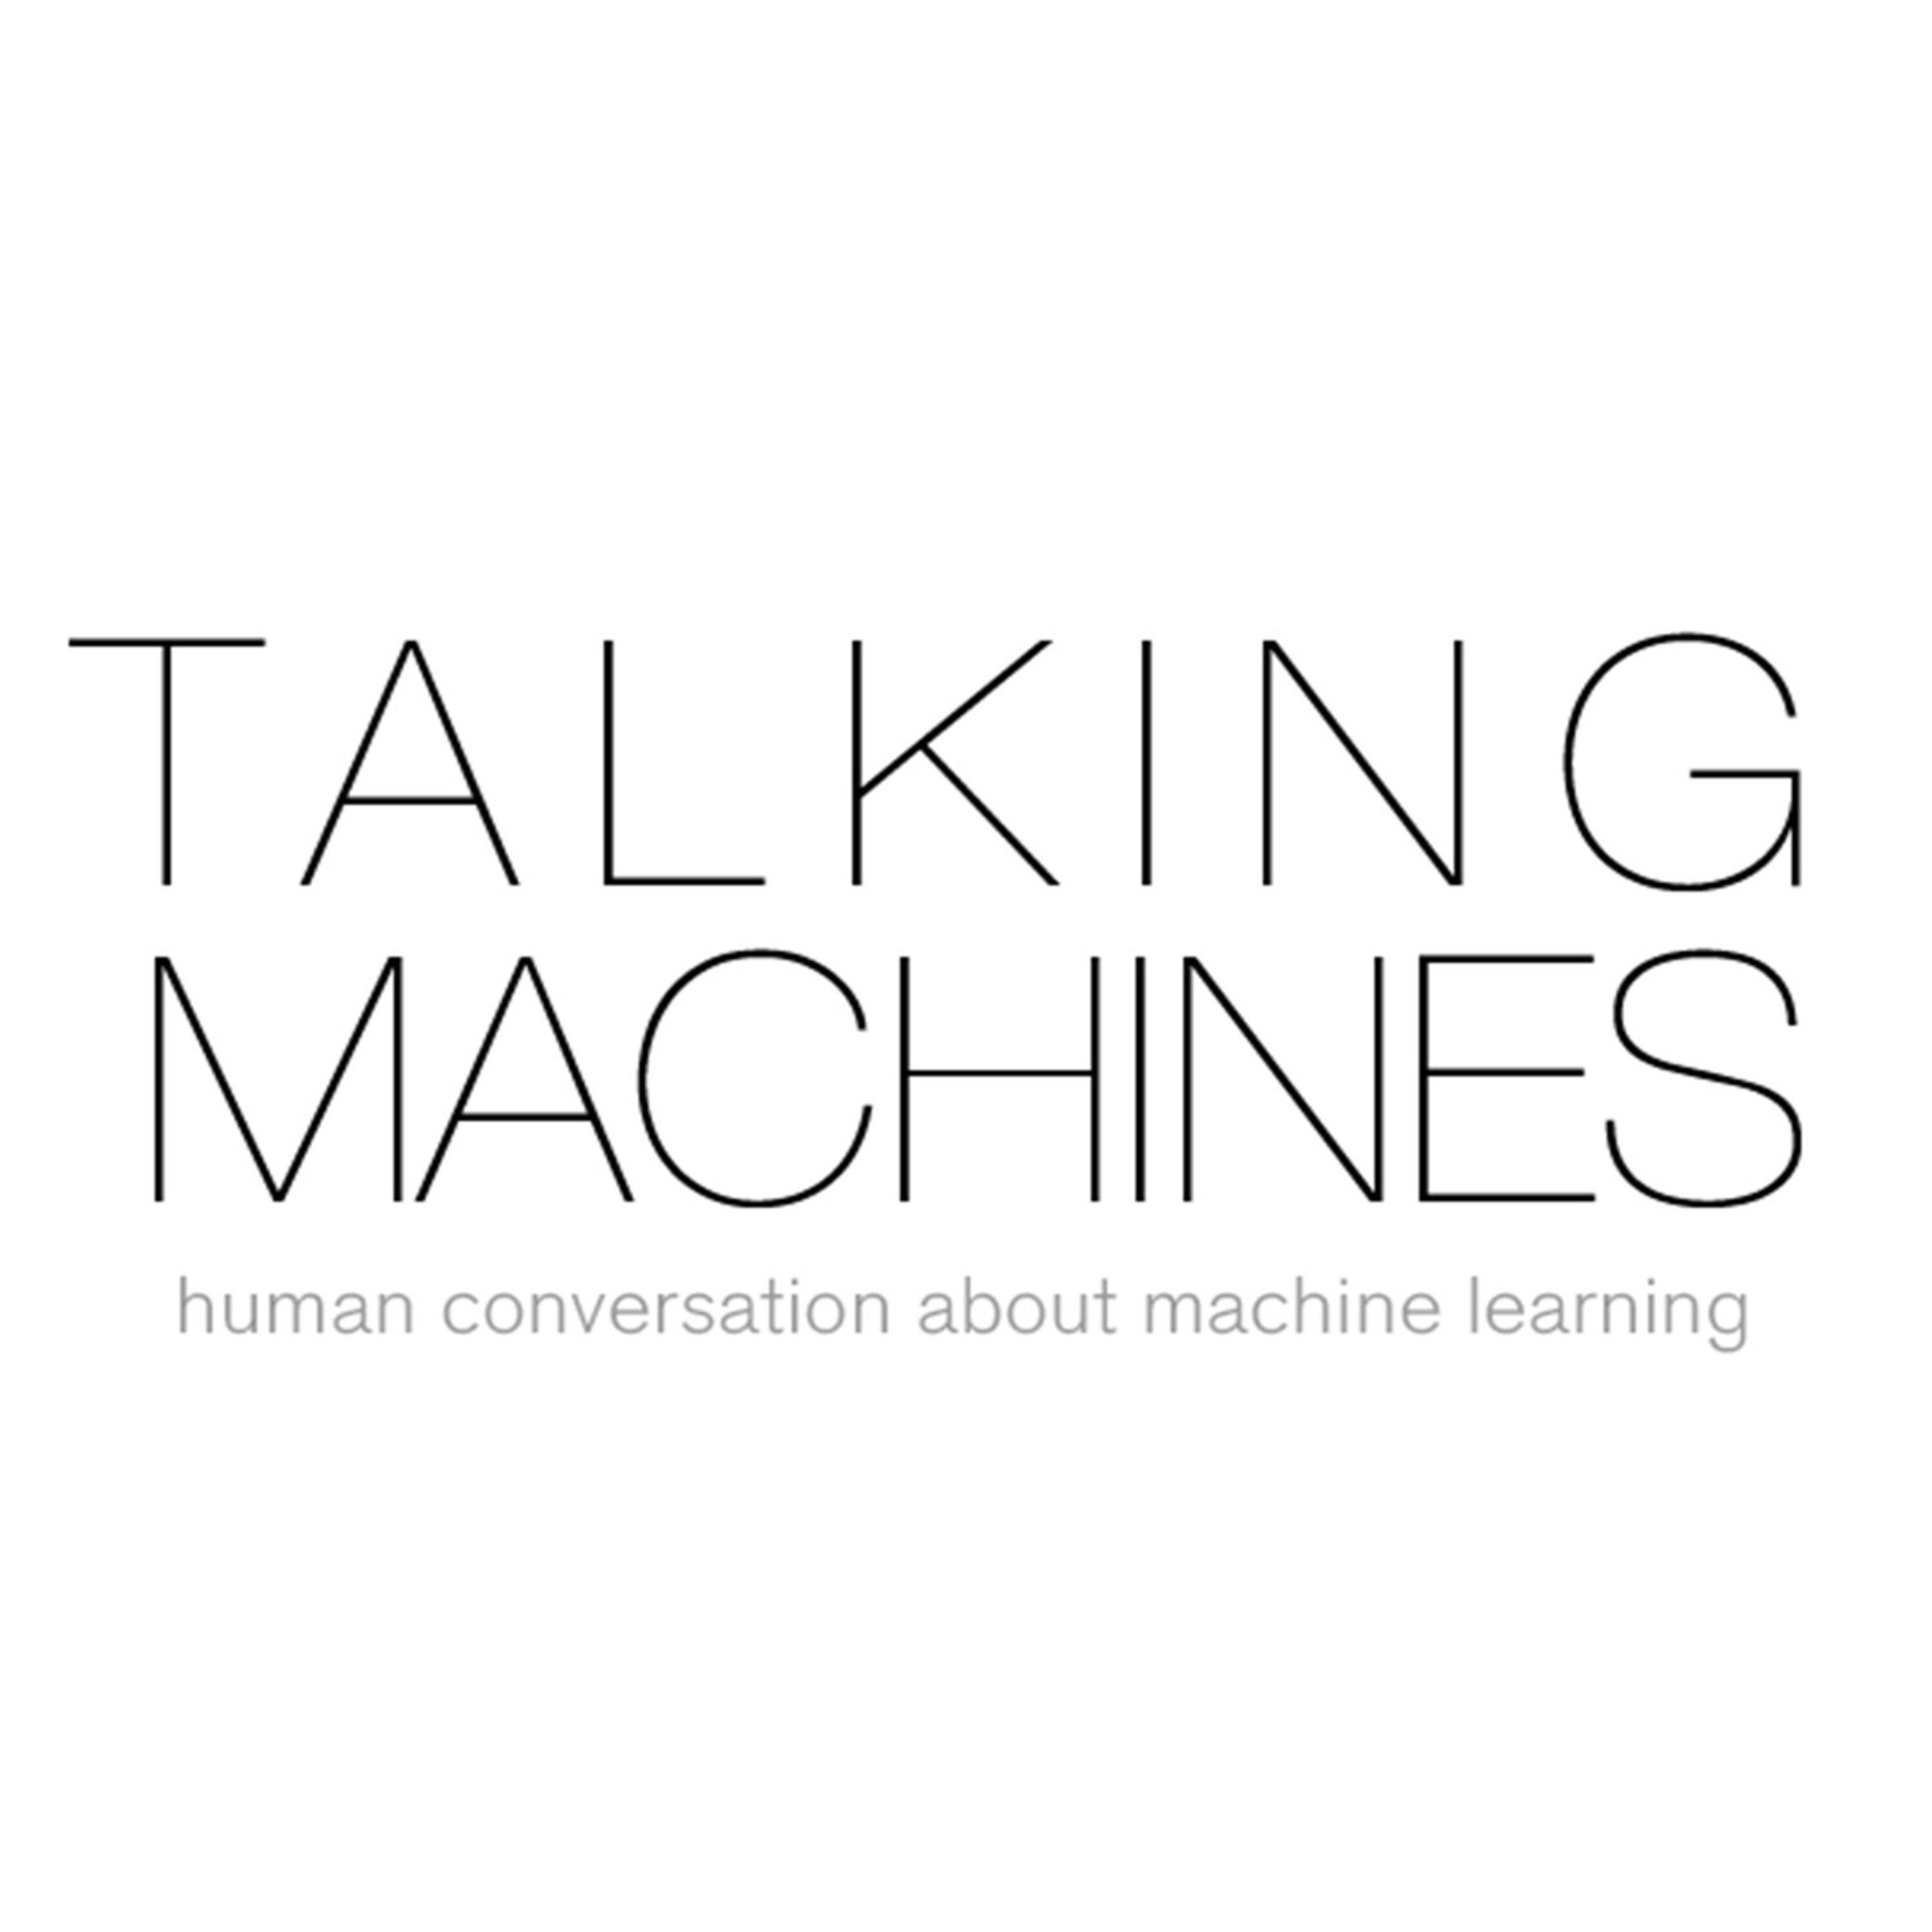 Hosts of Talking Machines: Neil Lawrence and Ryan Adams